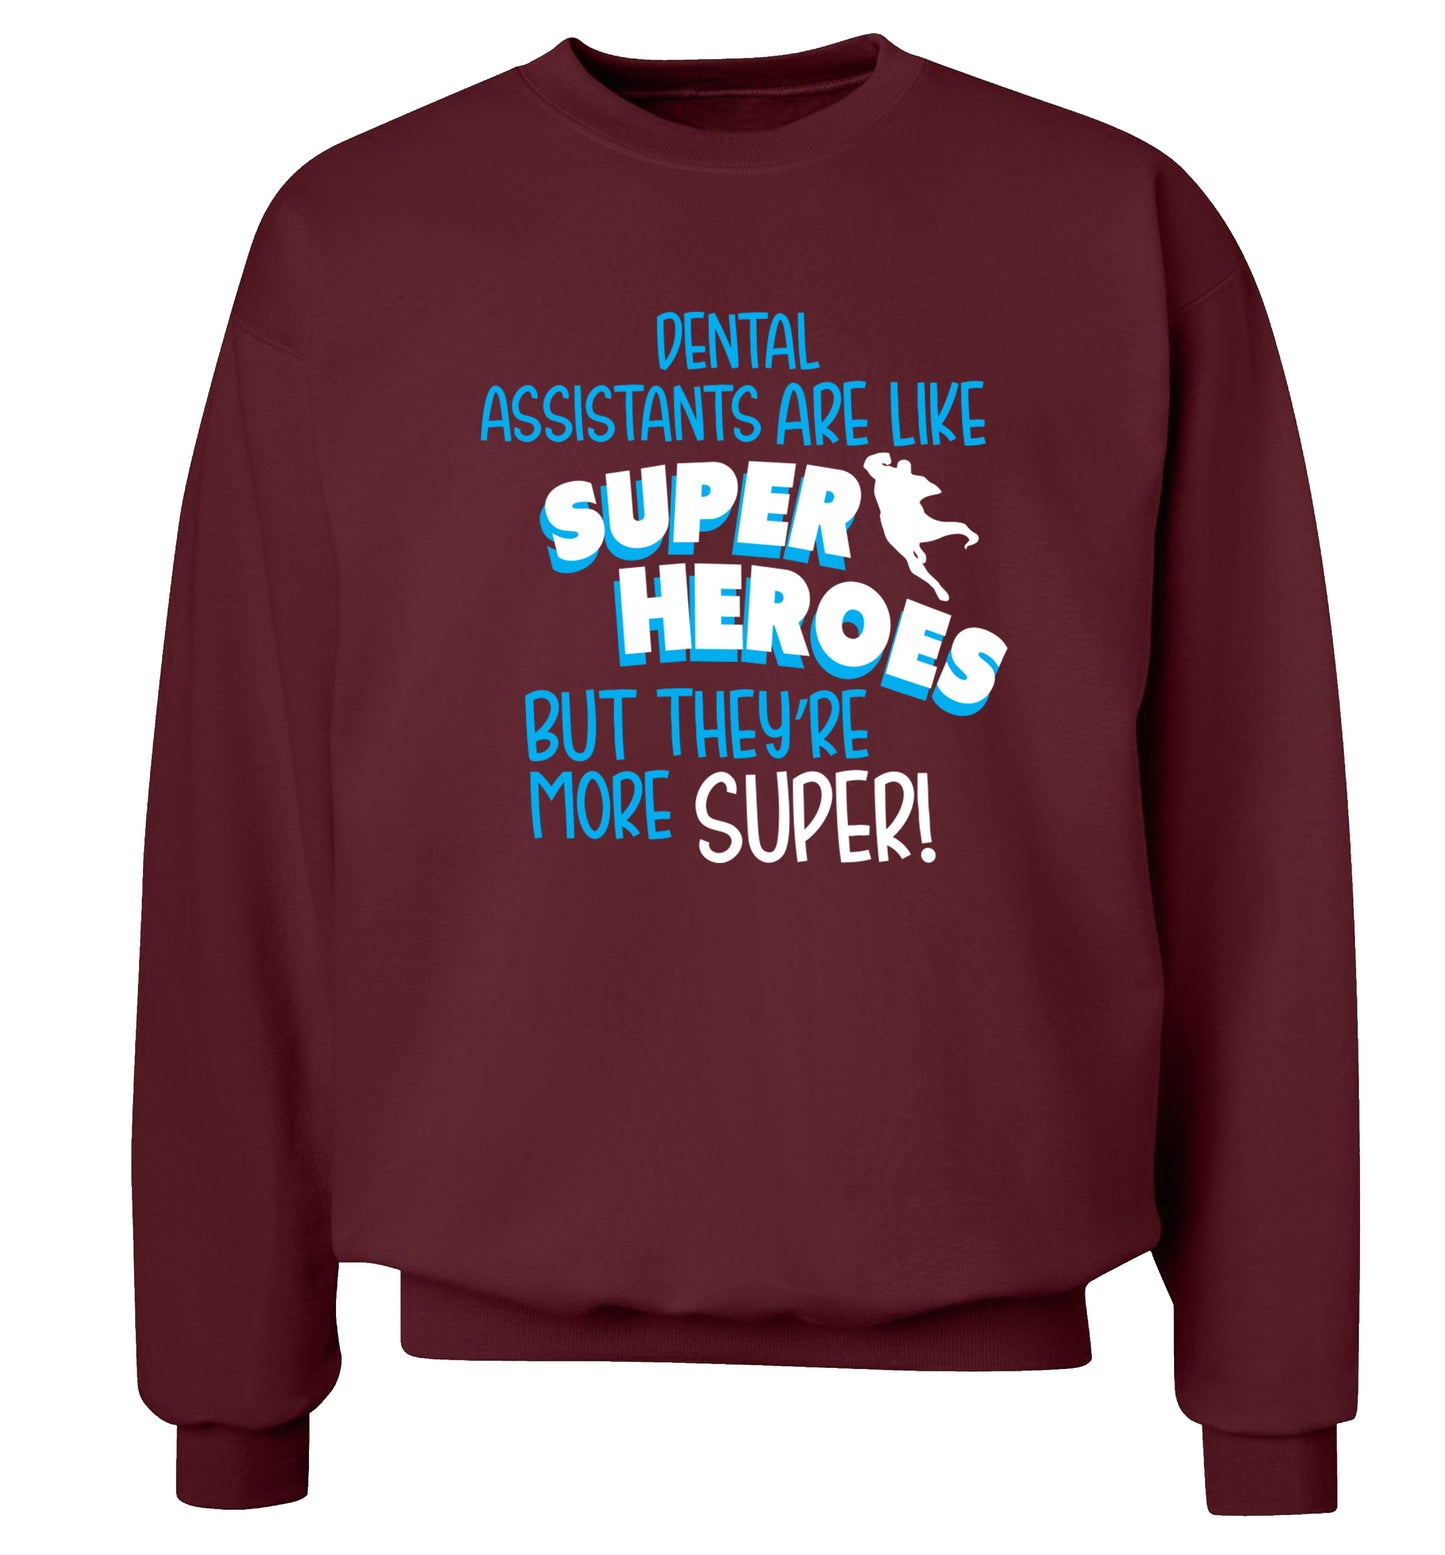 Dental Assistants are like superheros but they're more super Adult's unisex maroon Sweater 2XL